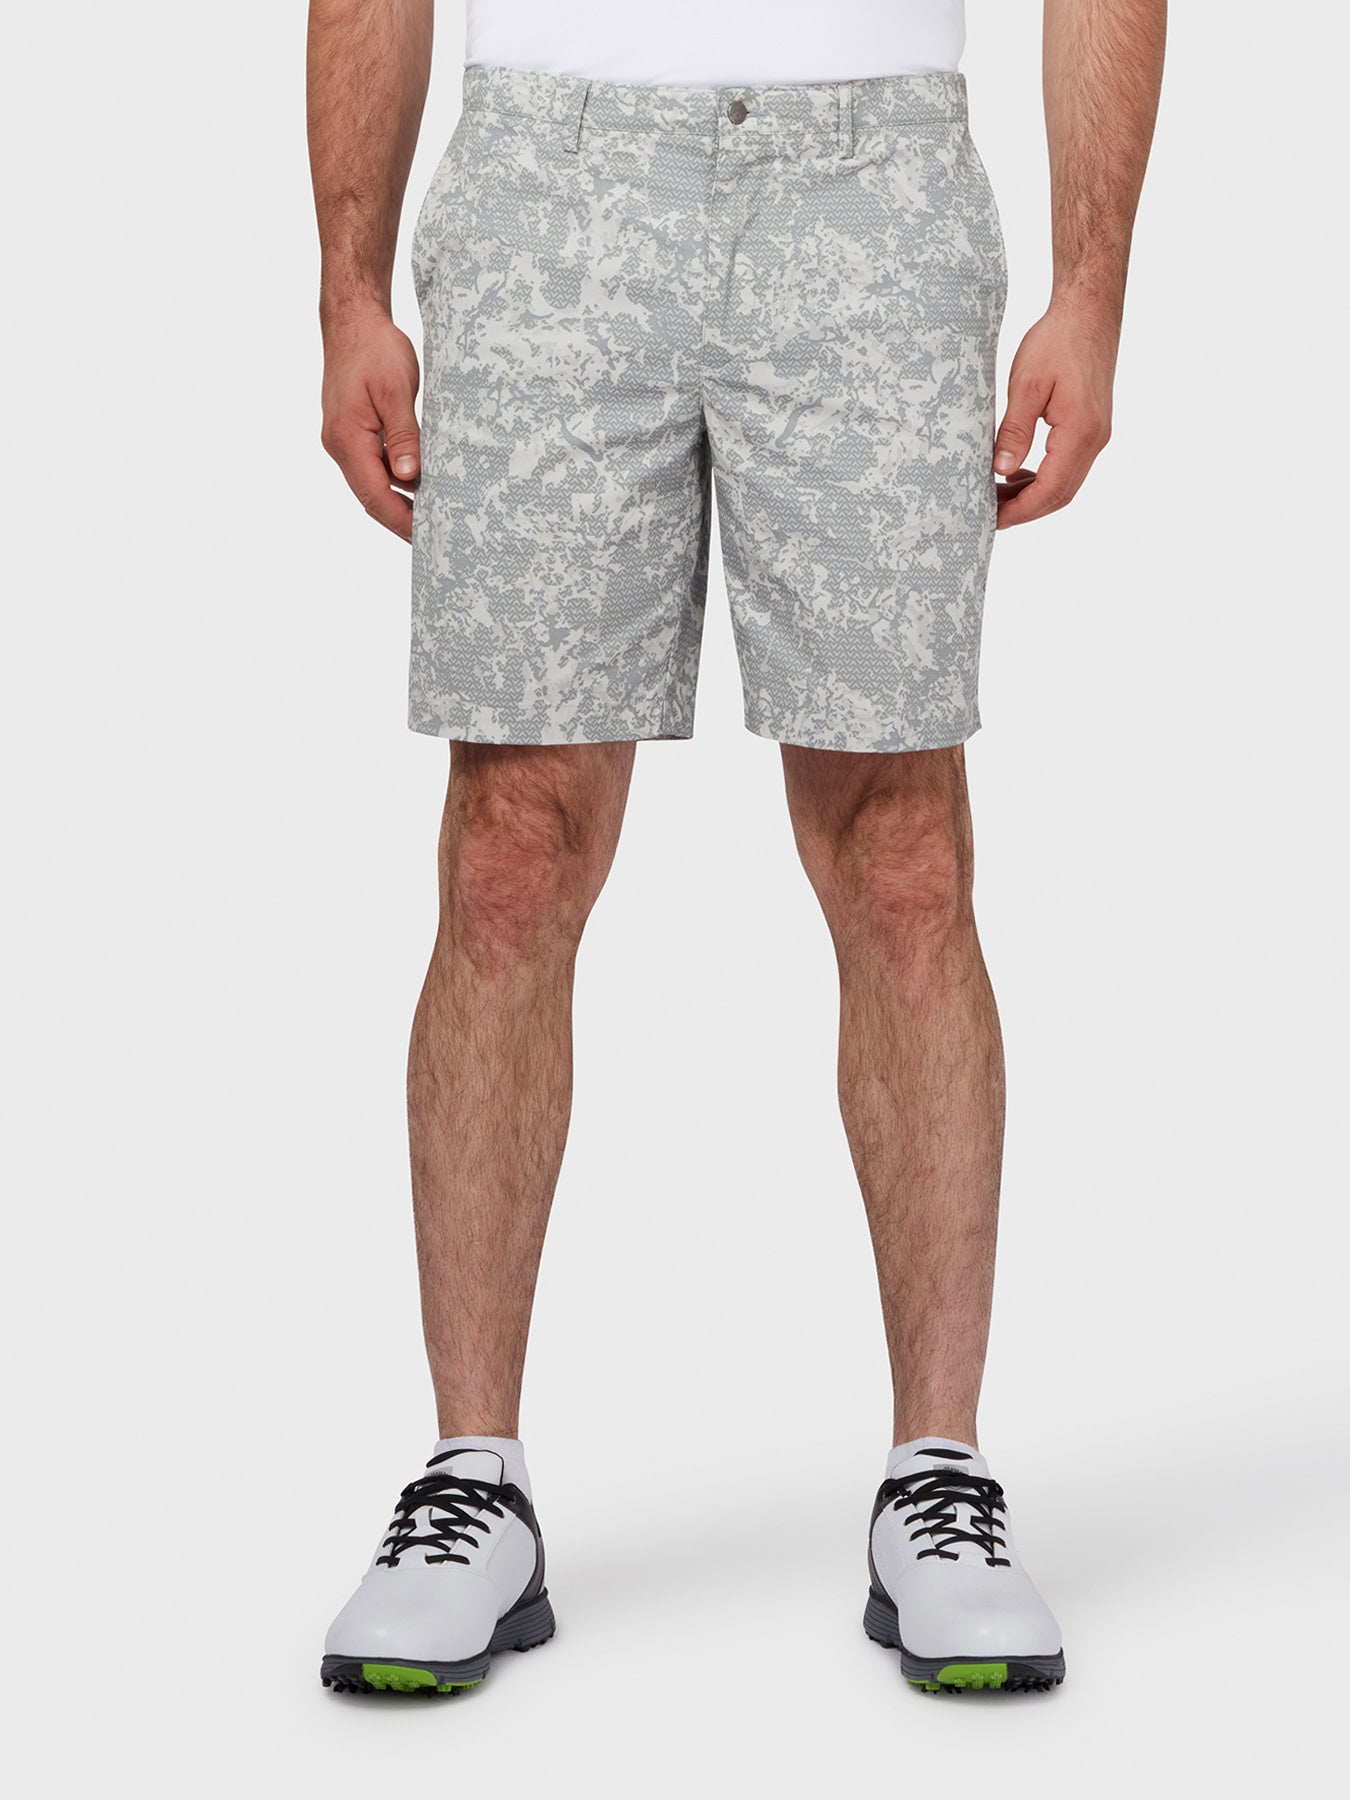 View X Series Abstract Camo Shorts In Quarry Grey Quarry 40 information